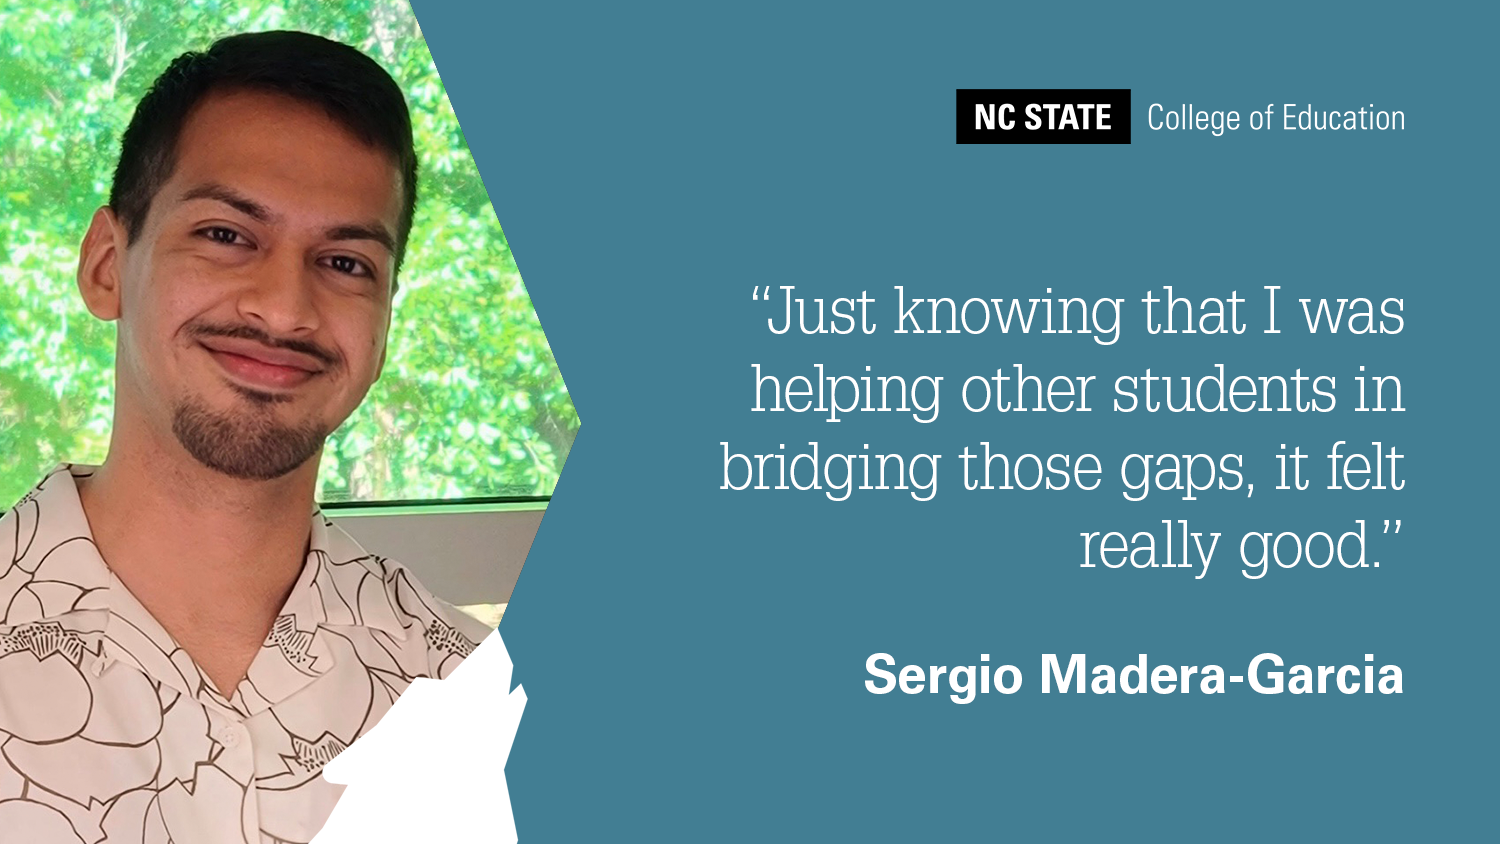 Photo of Sergio Medara-Garcia with quote: Just Knowing That I Was Helping Other Students in Bridging Those Gaps, It Felt Really Good.